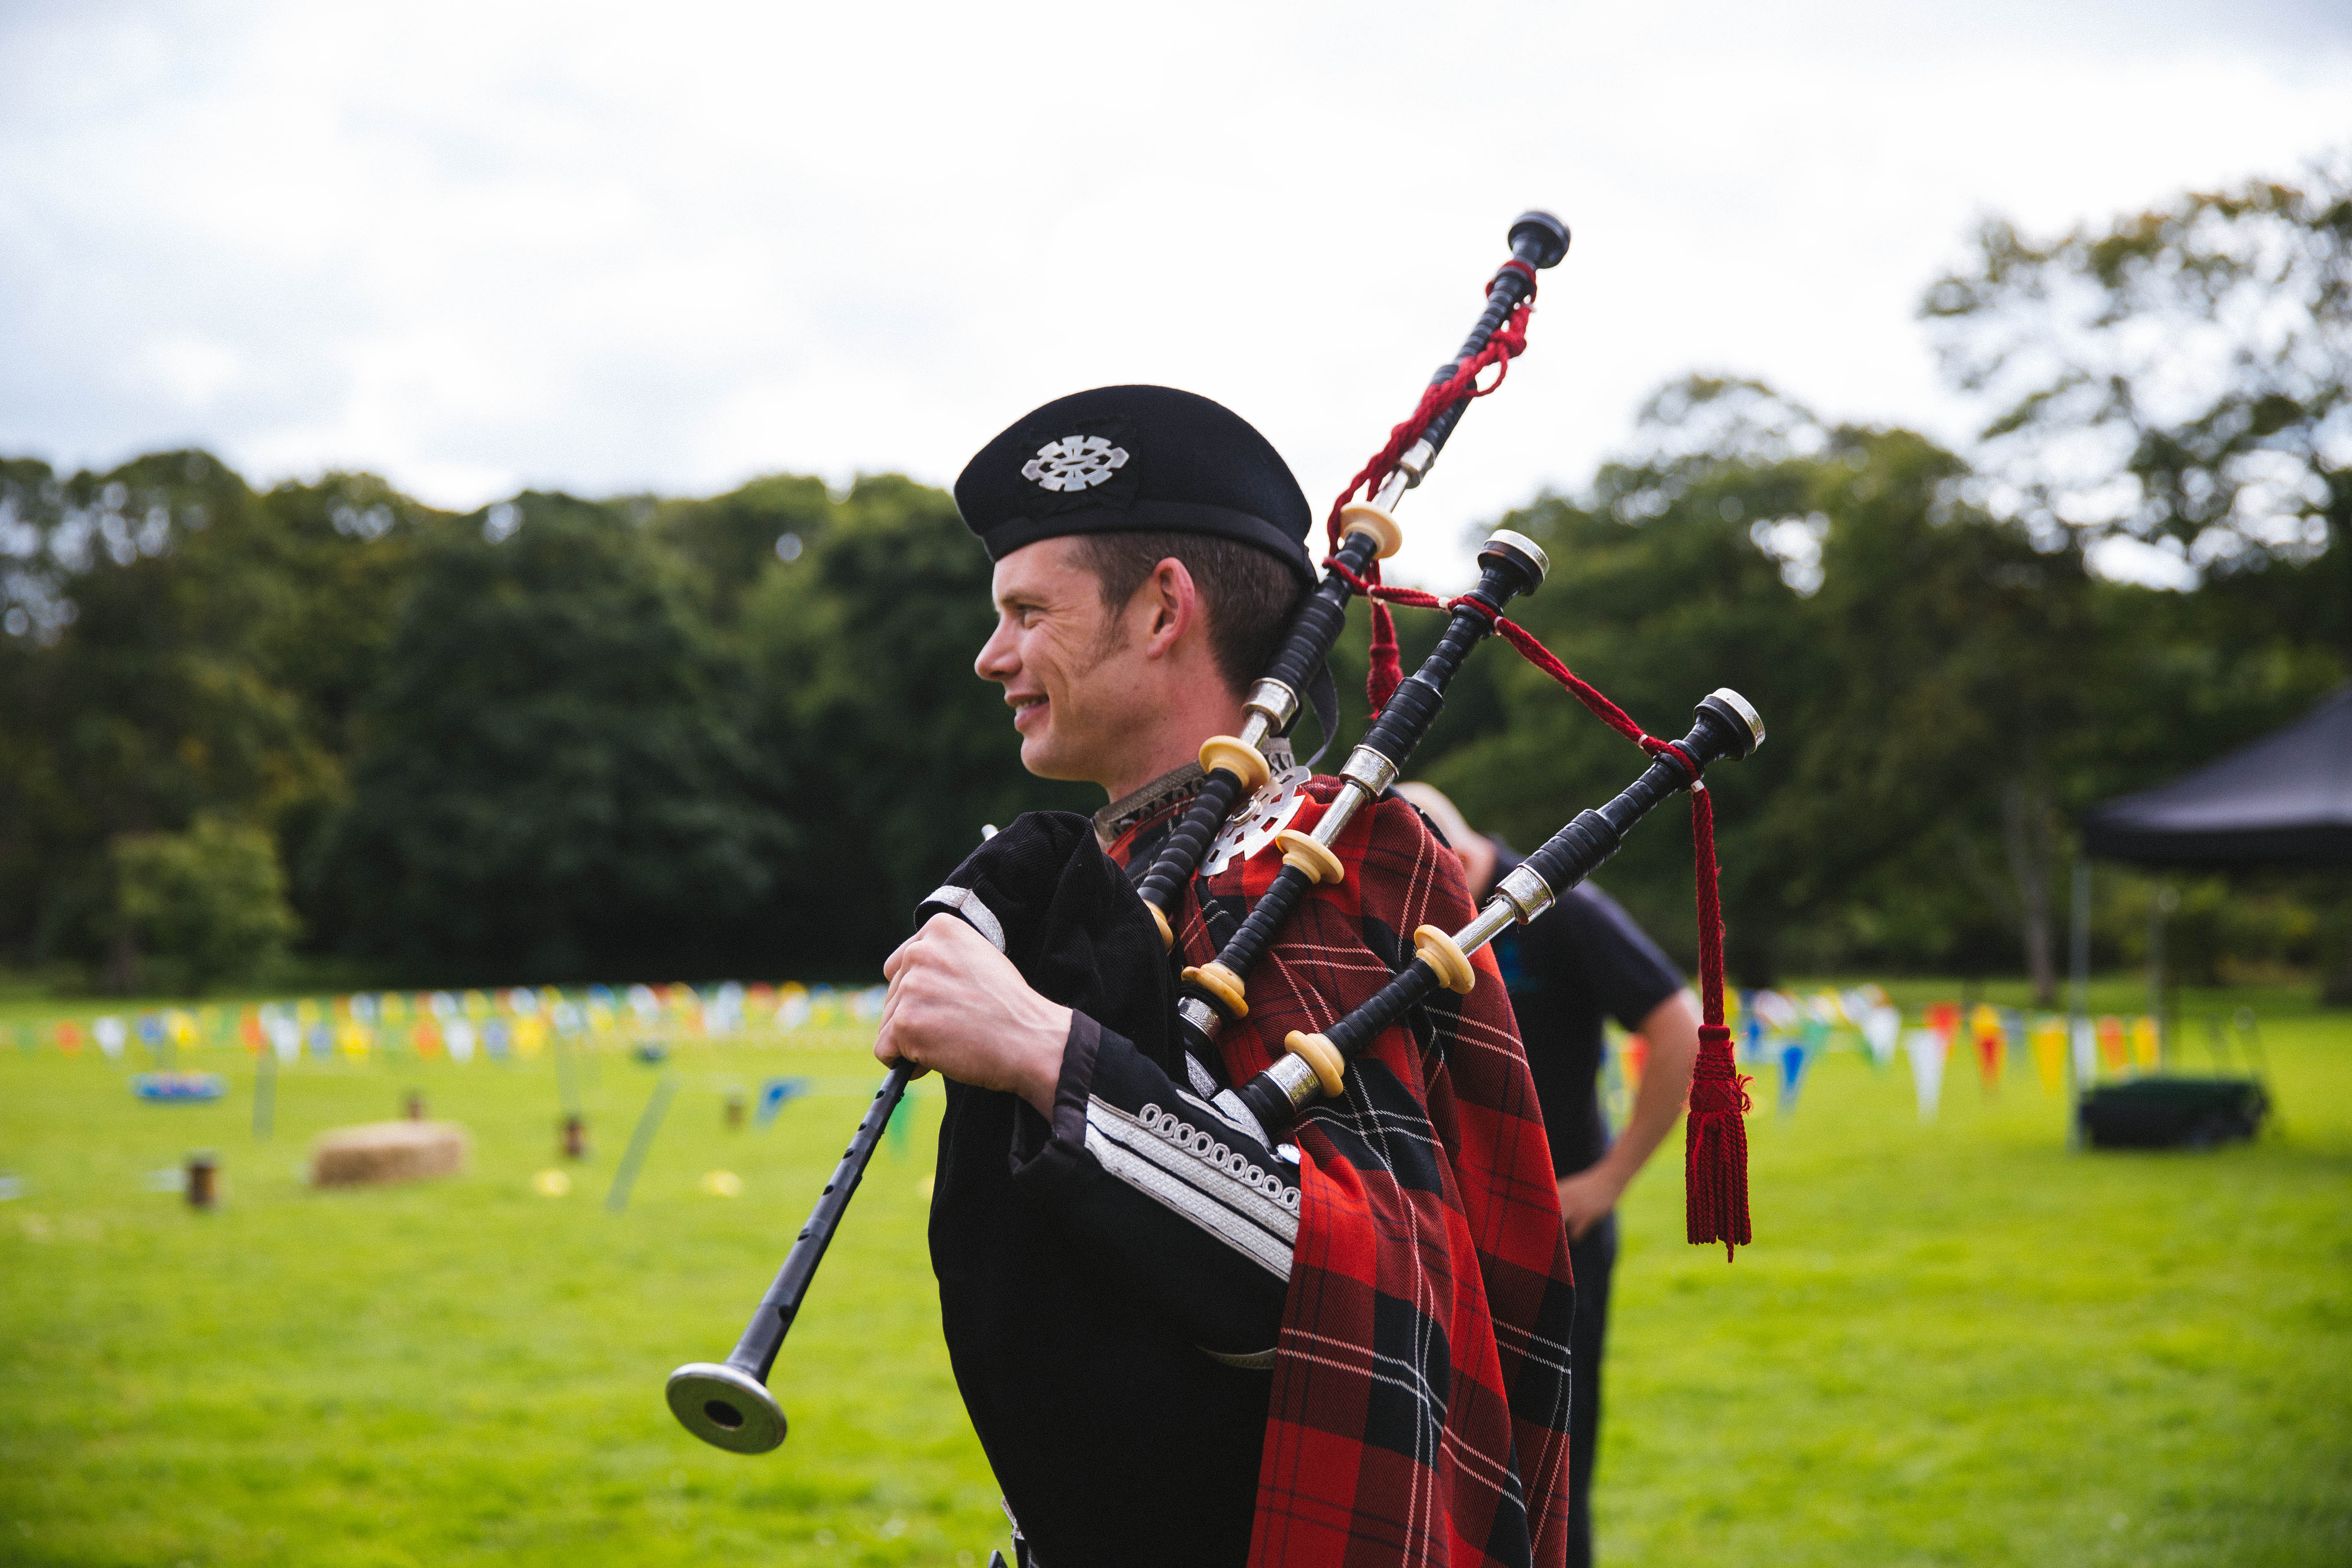 Fun interactive bagpipe lessons